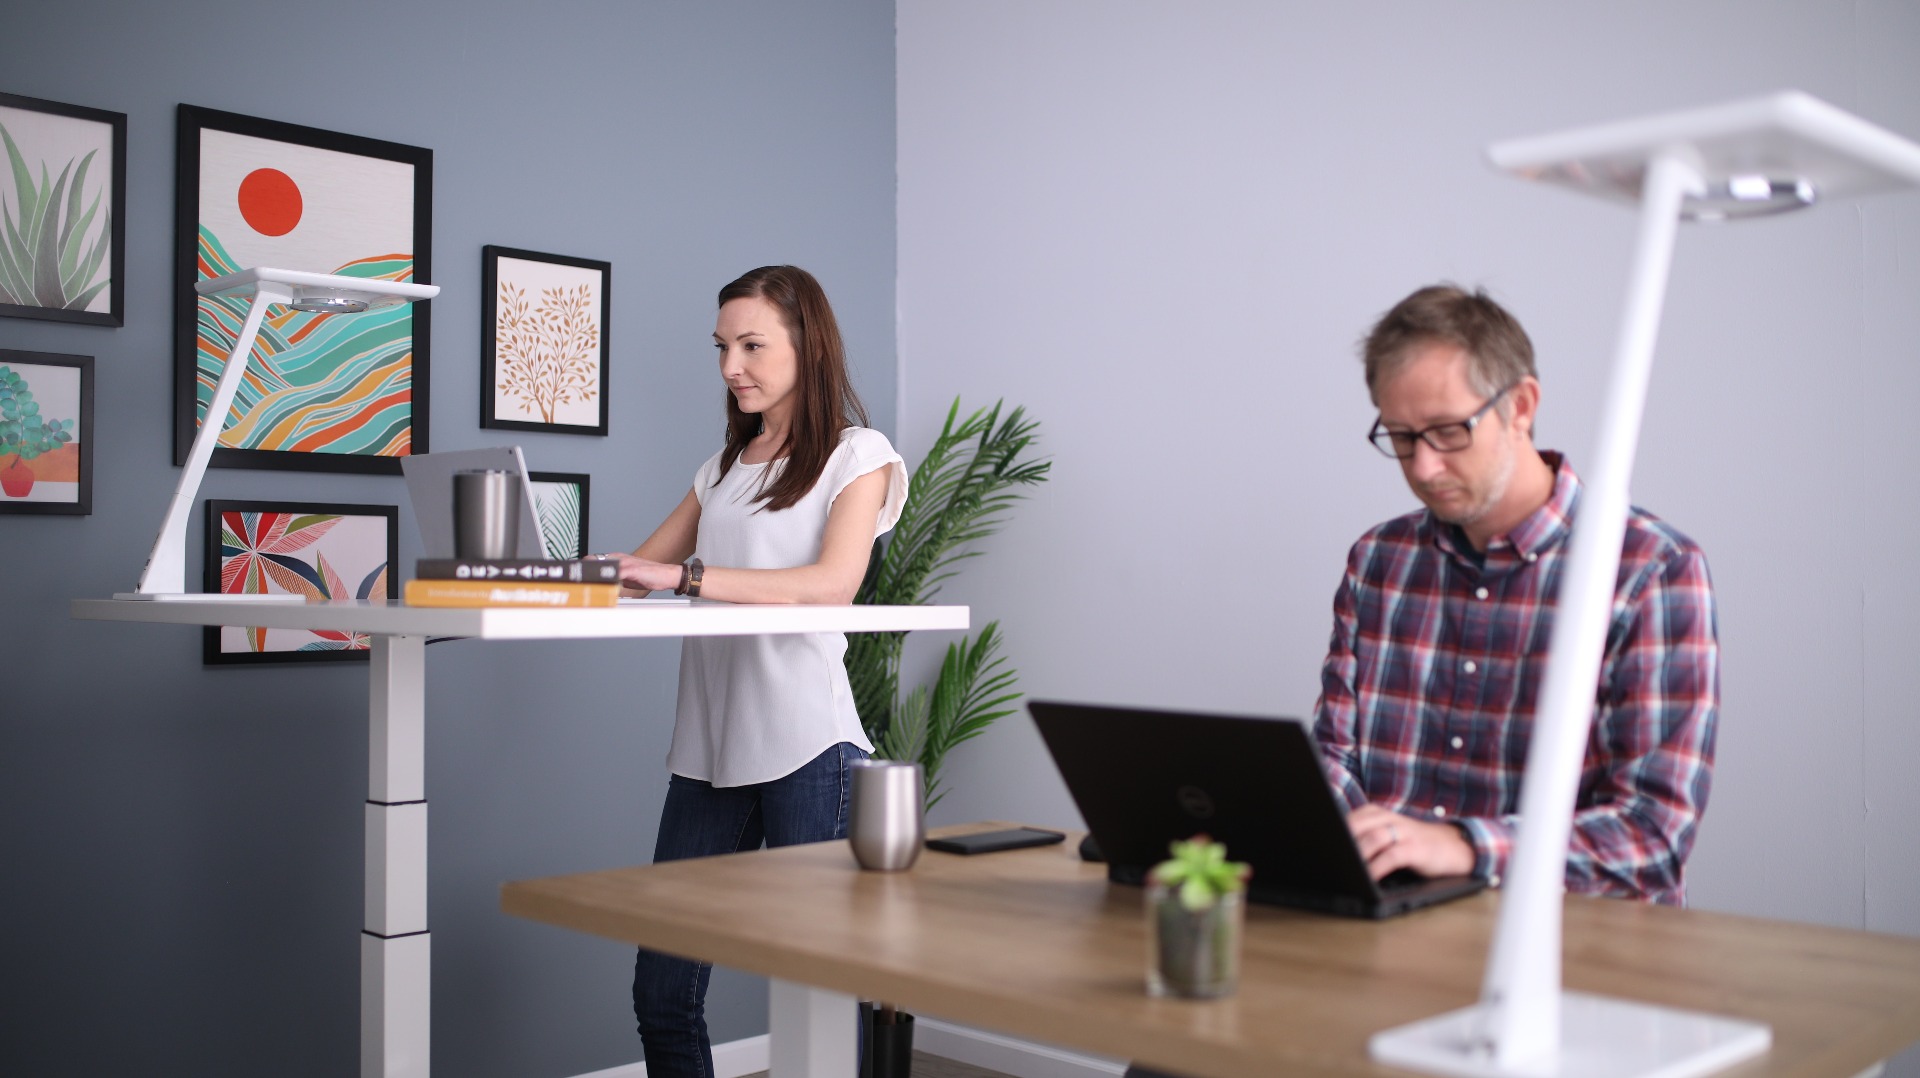 One person sitting, one standing at desks